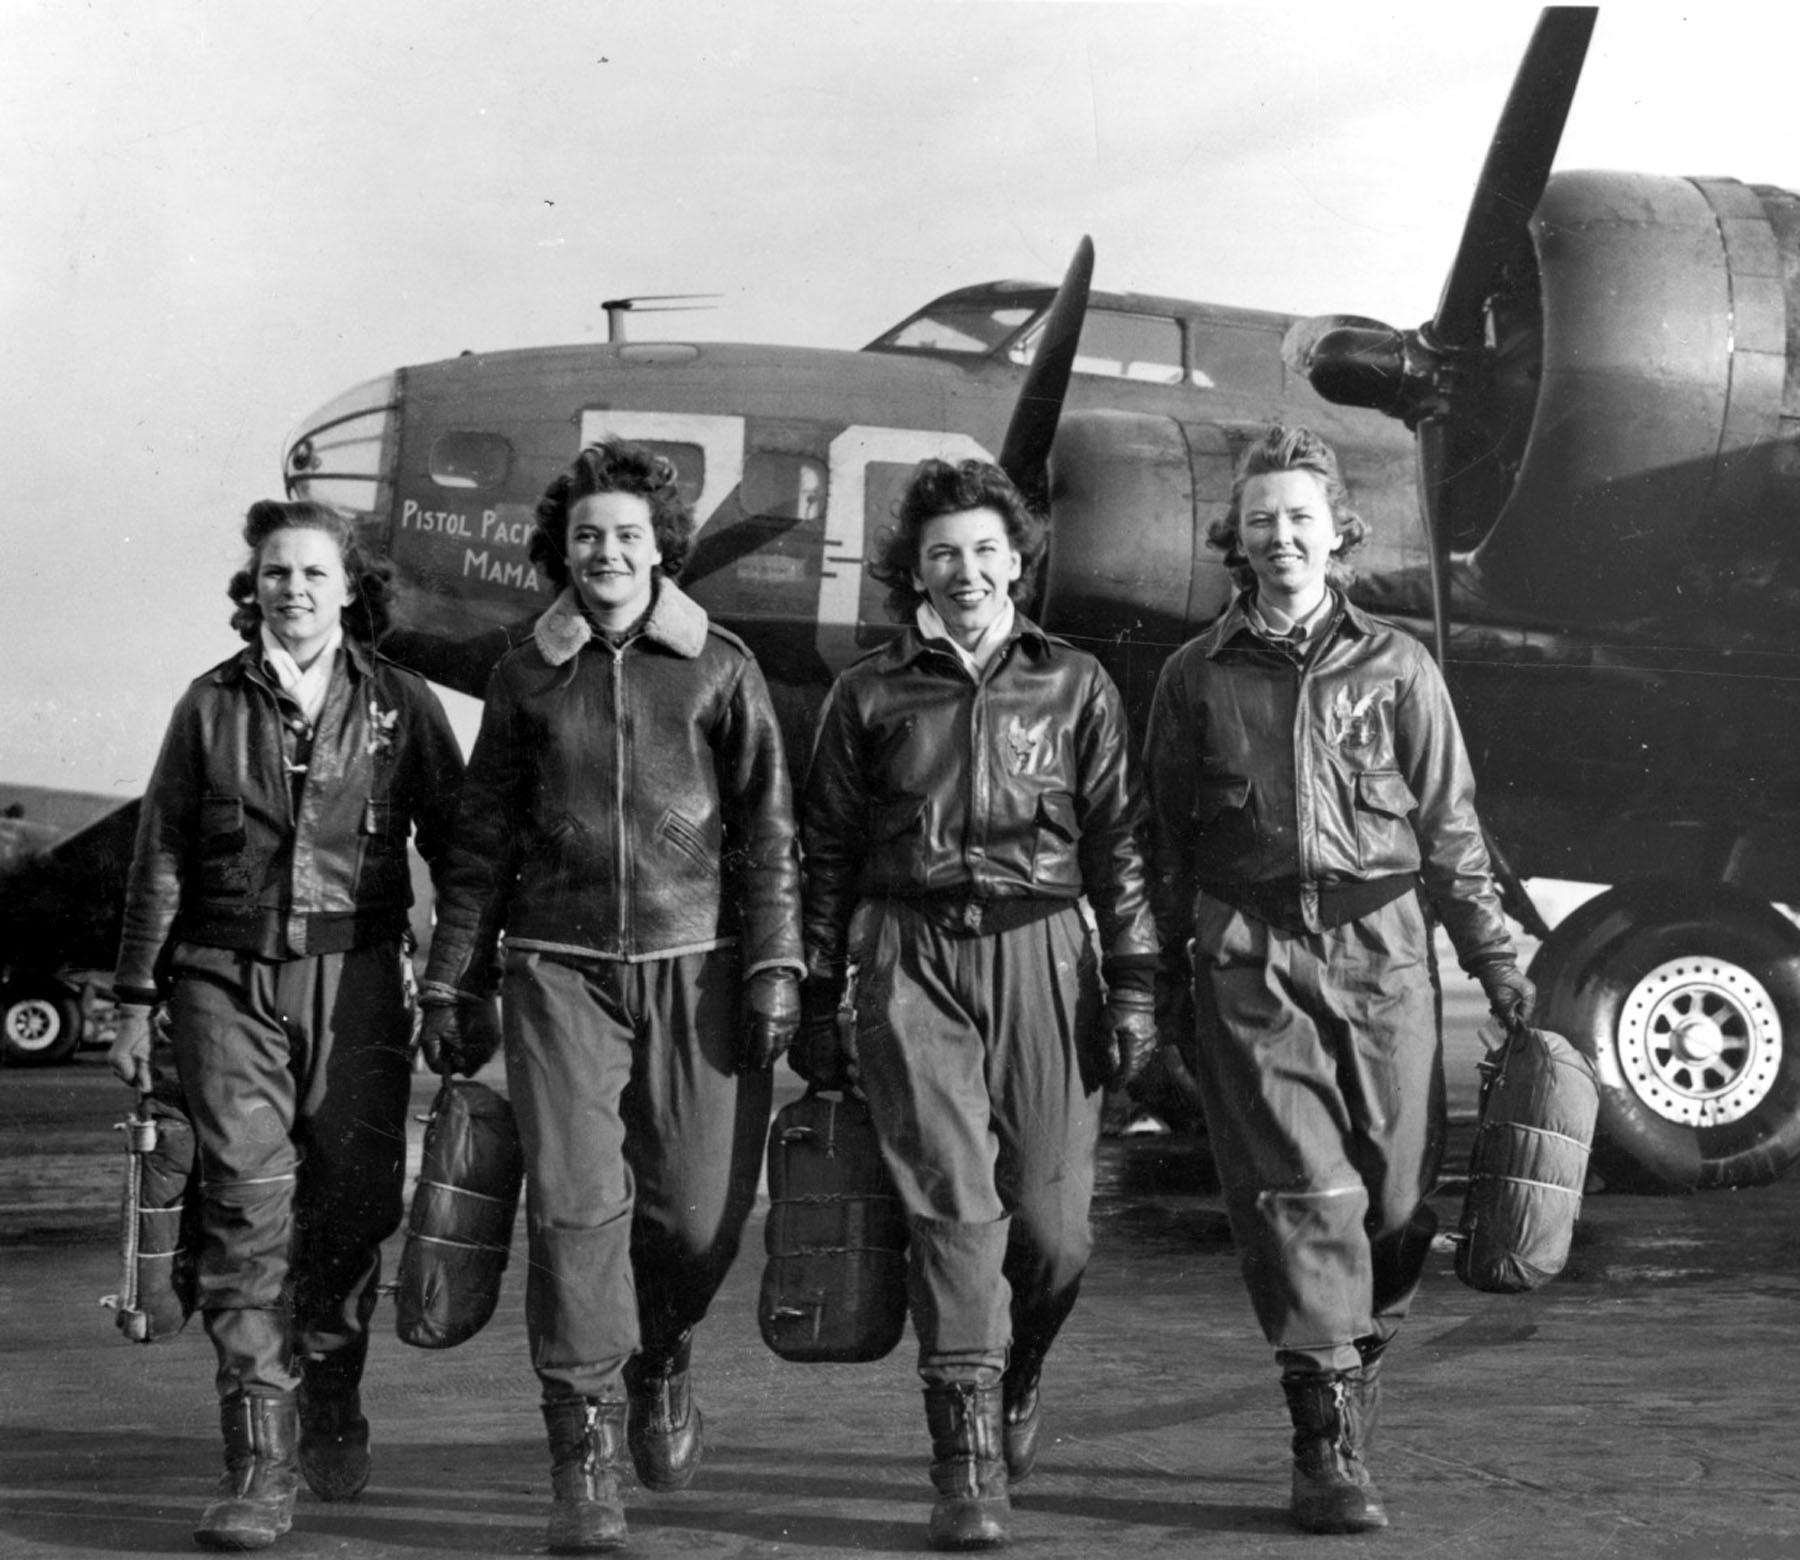 Four women wearing WWII era flight bomber jackets walk side by side away from a B-17 bomber plane parked behind them.